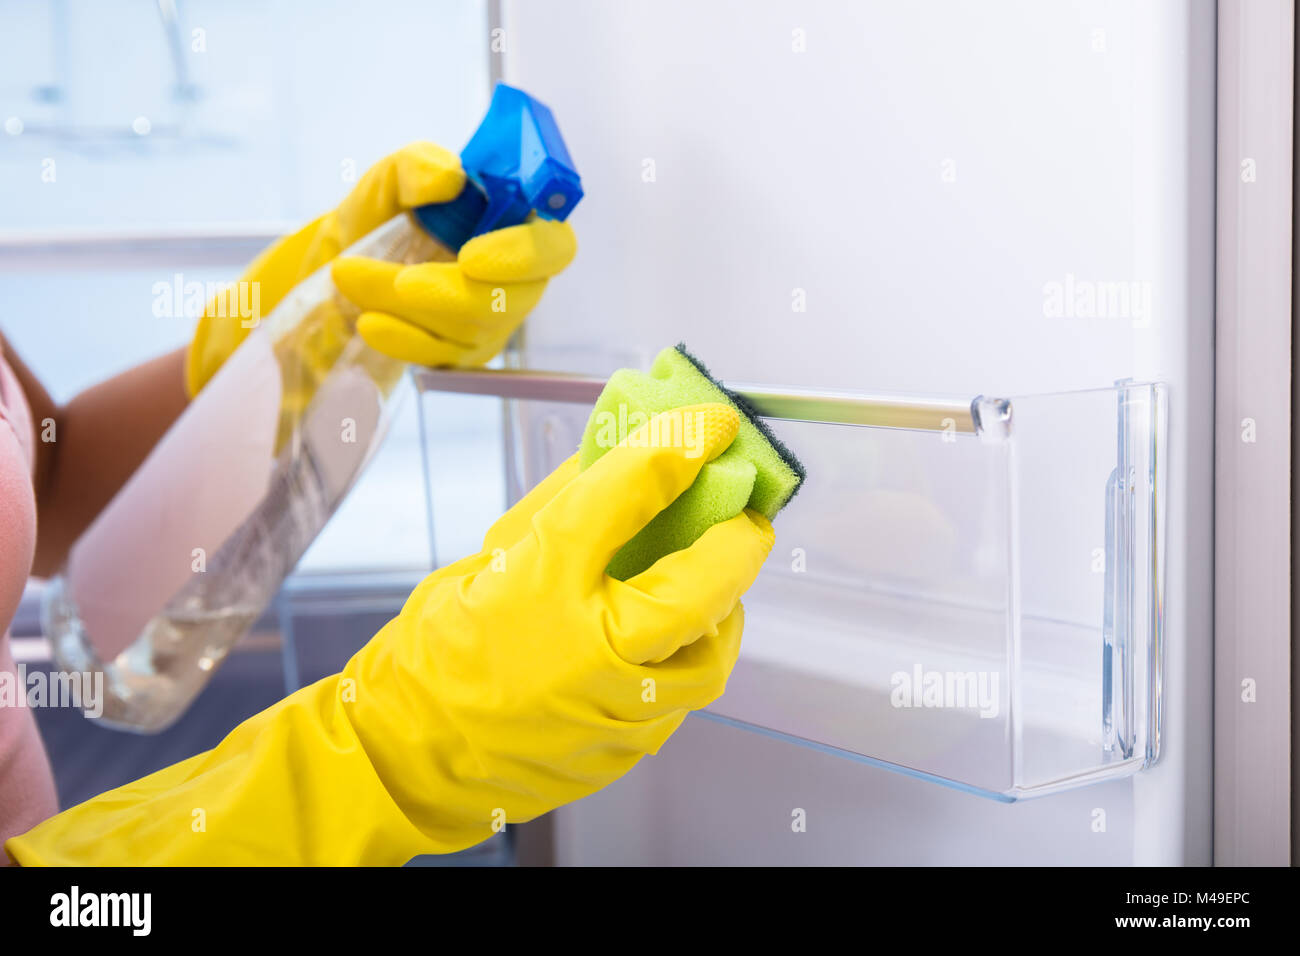 Close-up Of Woman's Hand Wearing Yellow Gloves Cleaning Open Refrigerator With Spray Bottle And Sponge Stock Photo